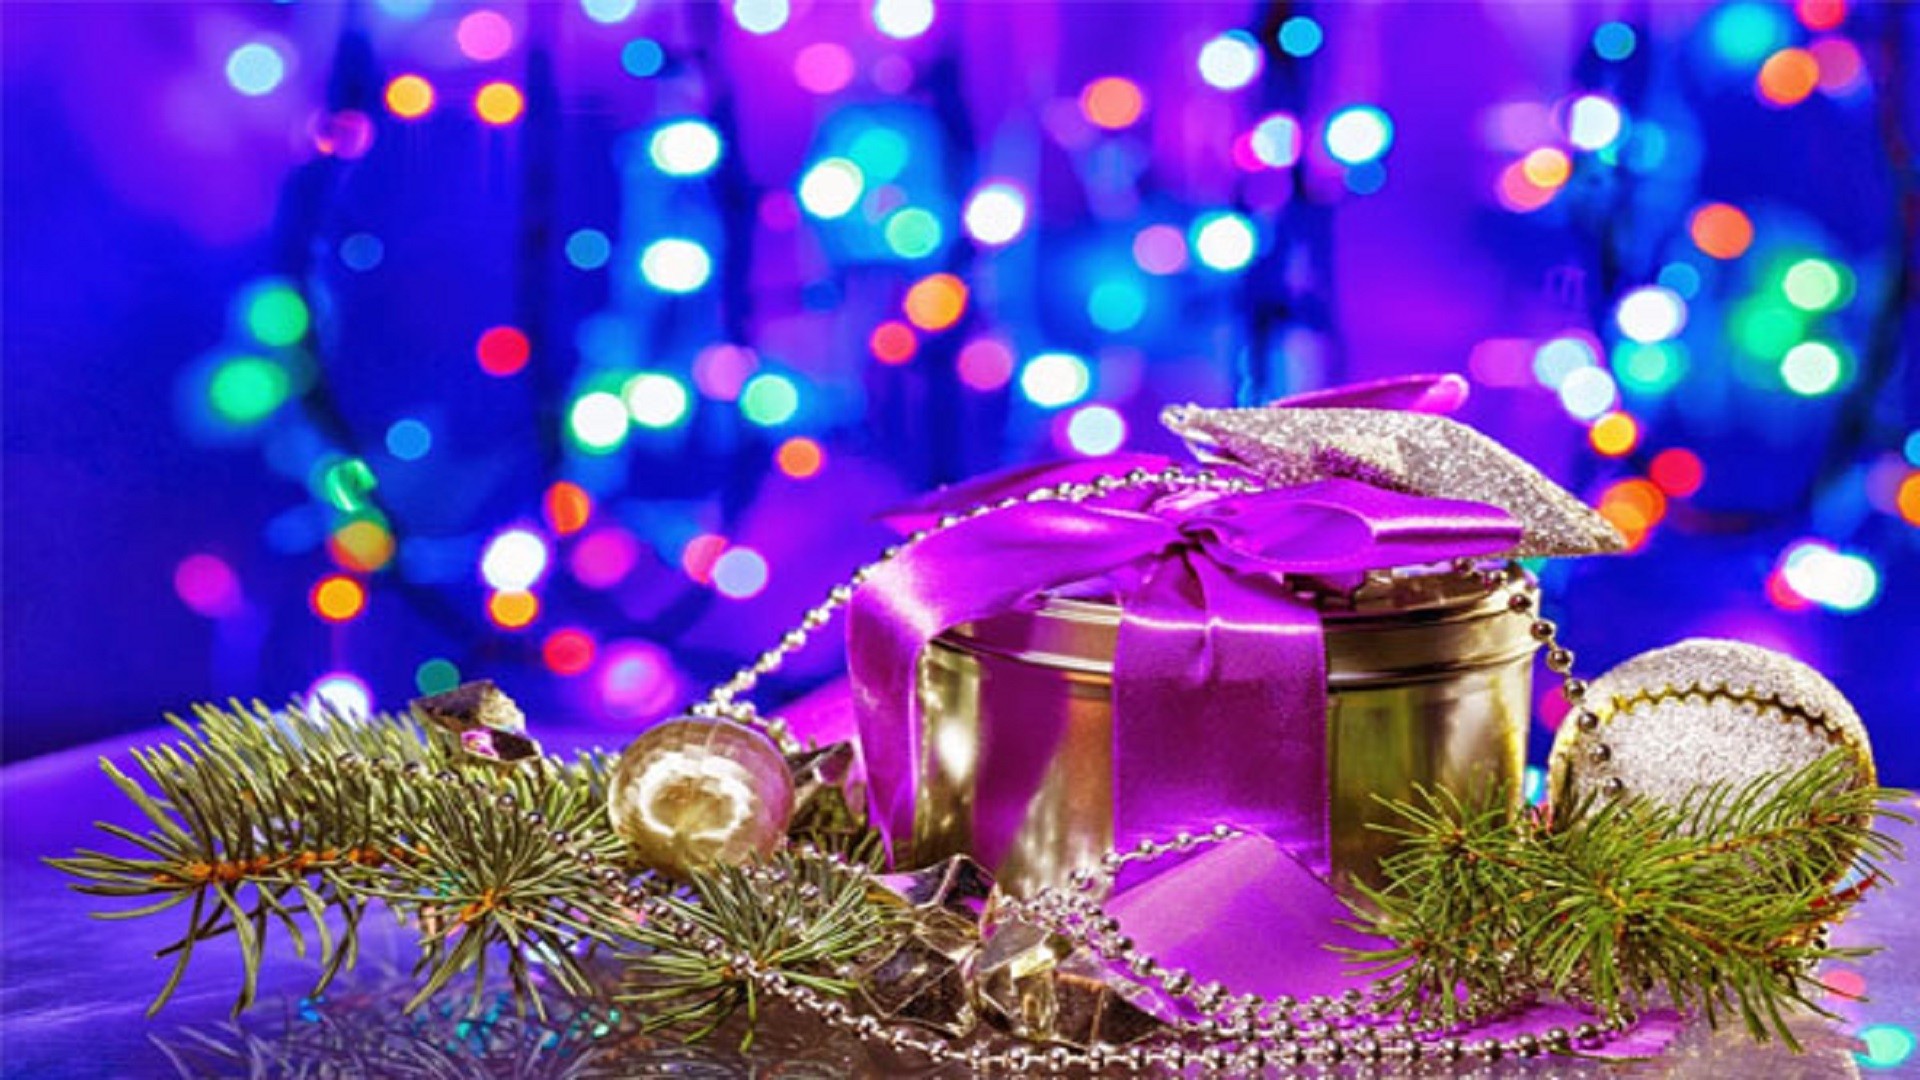 1920x1080 Picture of New Year decorations with fancy box on circles bokeh background  stock photo, images and stock photography.